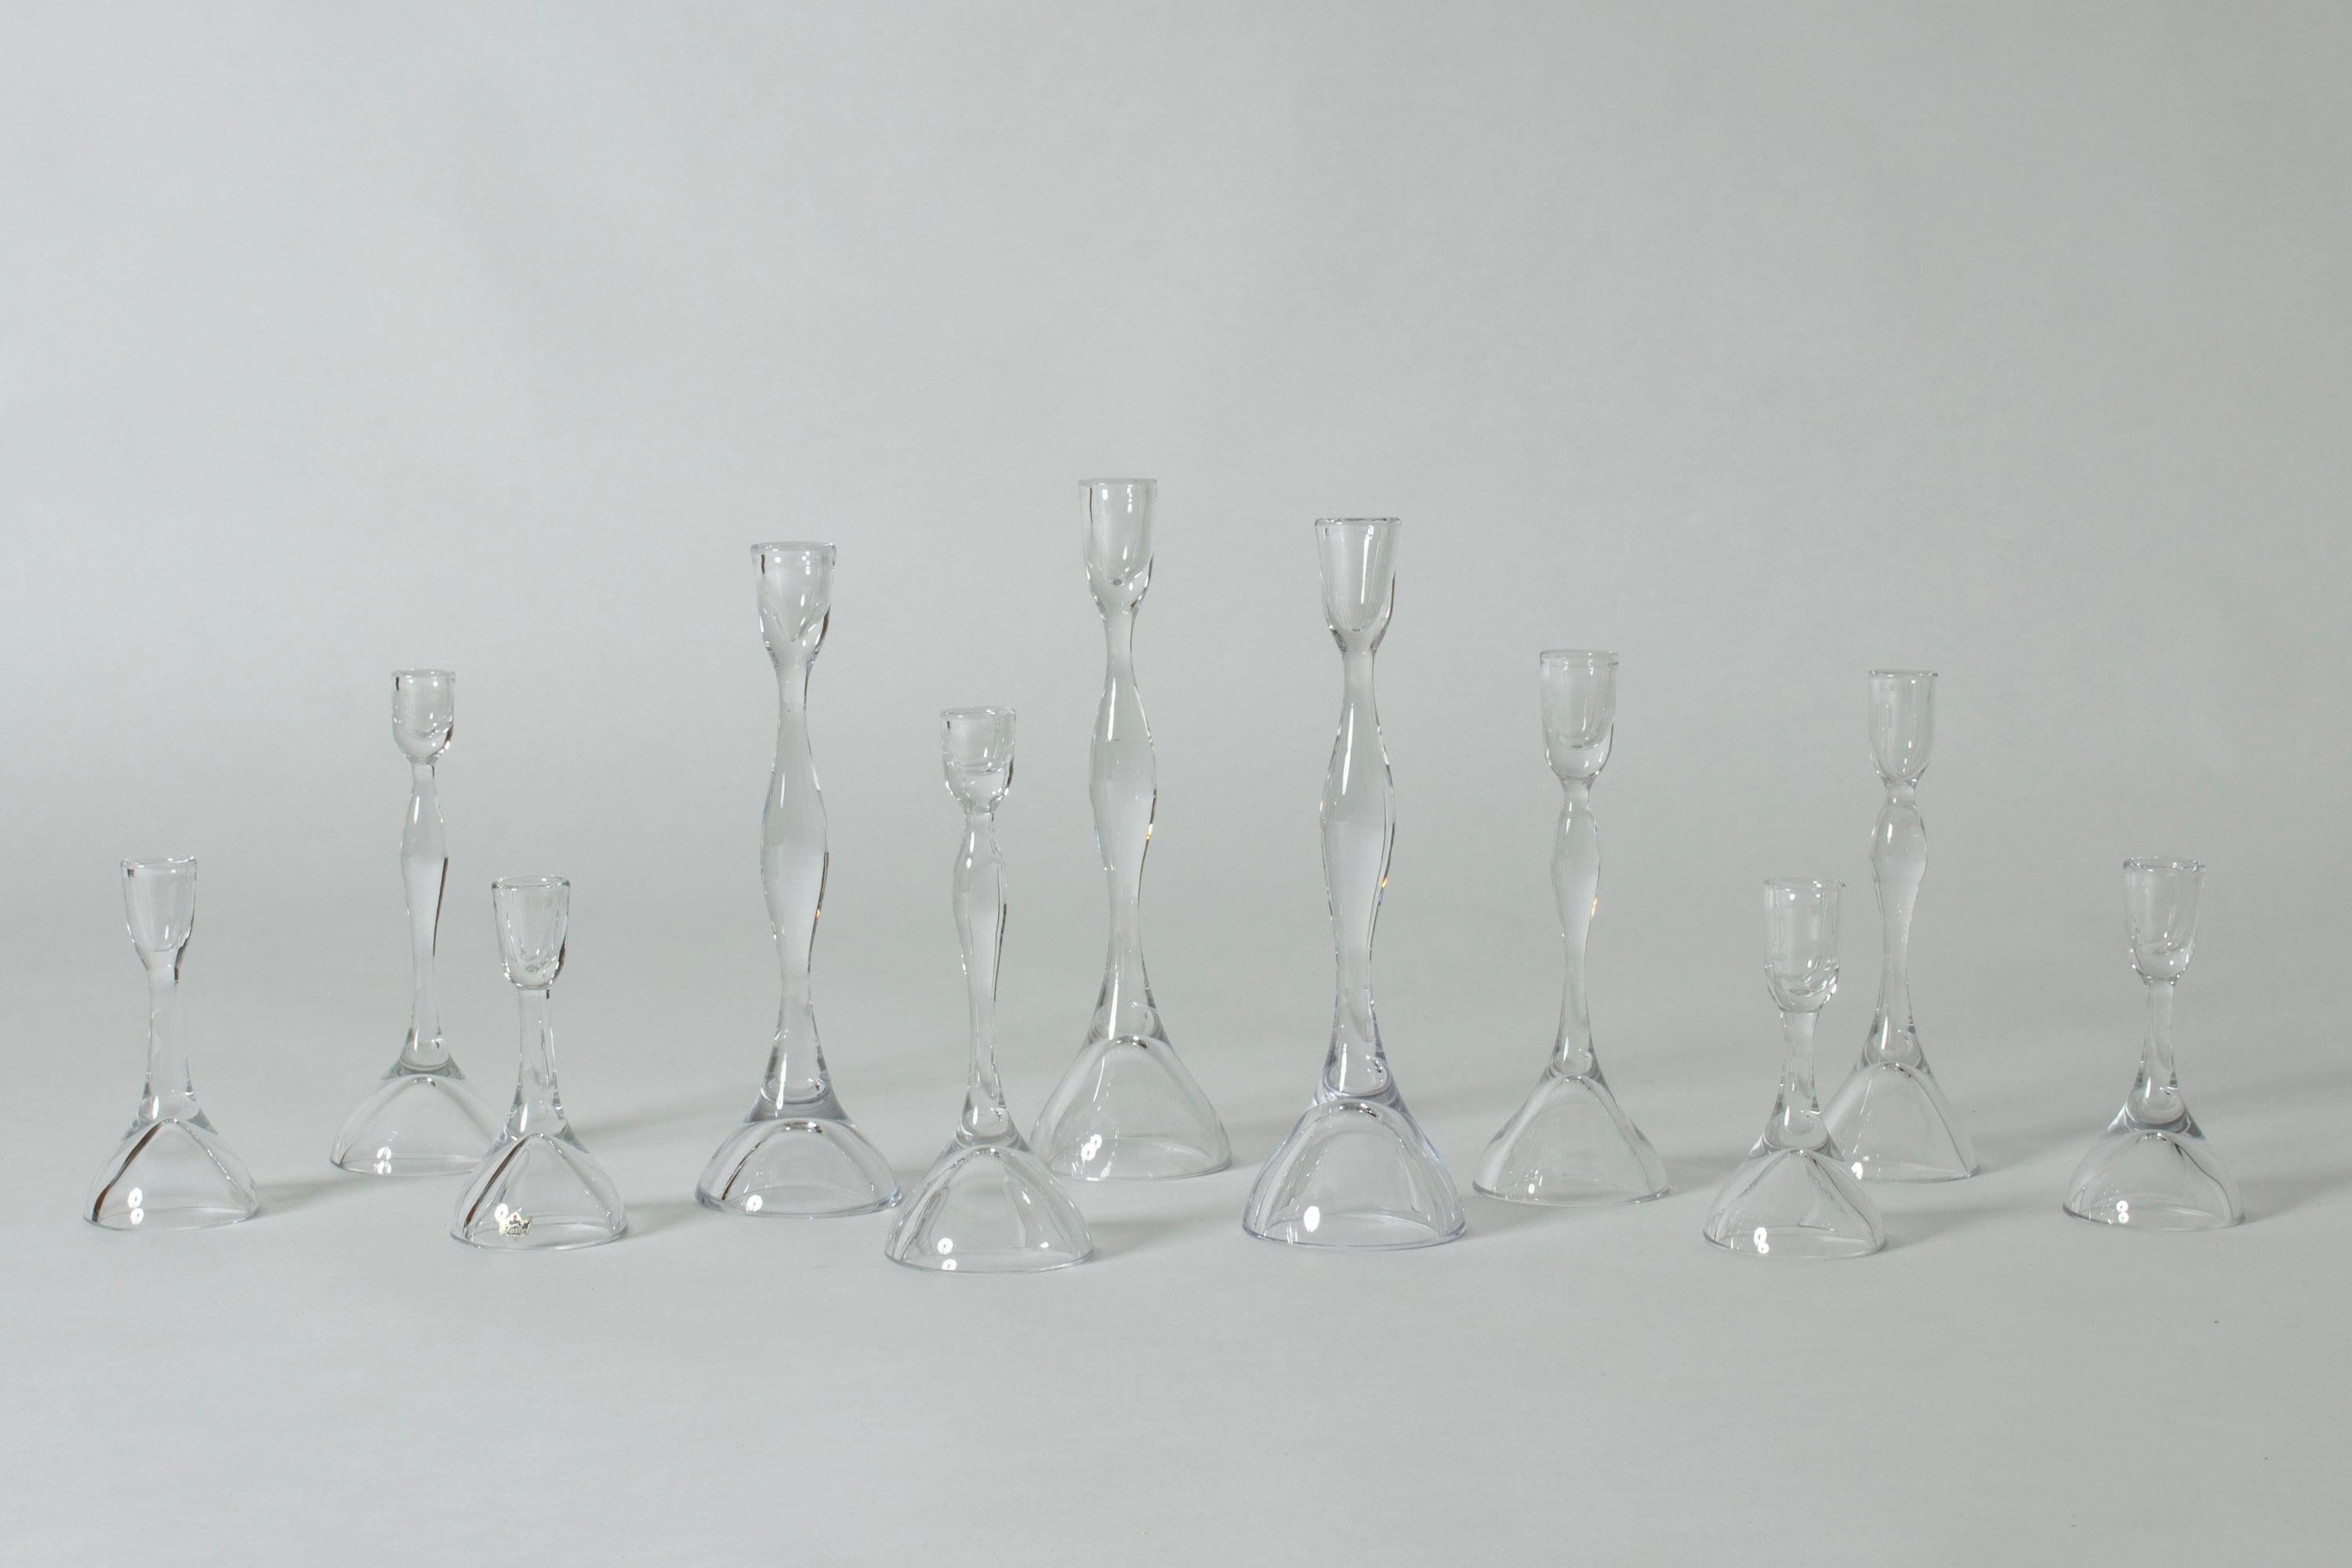 Set of eleven beautiful glass candlesticks by Vicke Lindstrand. Pure, crisp design in lucid glass. Each a slightly different size. Three tall ones, four middle sized and four short ones.

The short ones are ca 15 cm tall, the middle ones ca 22 cm